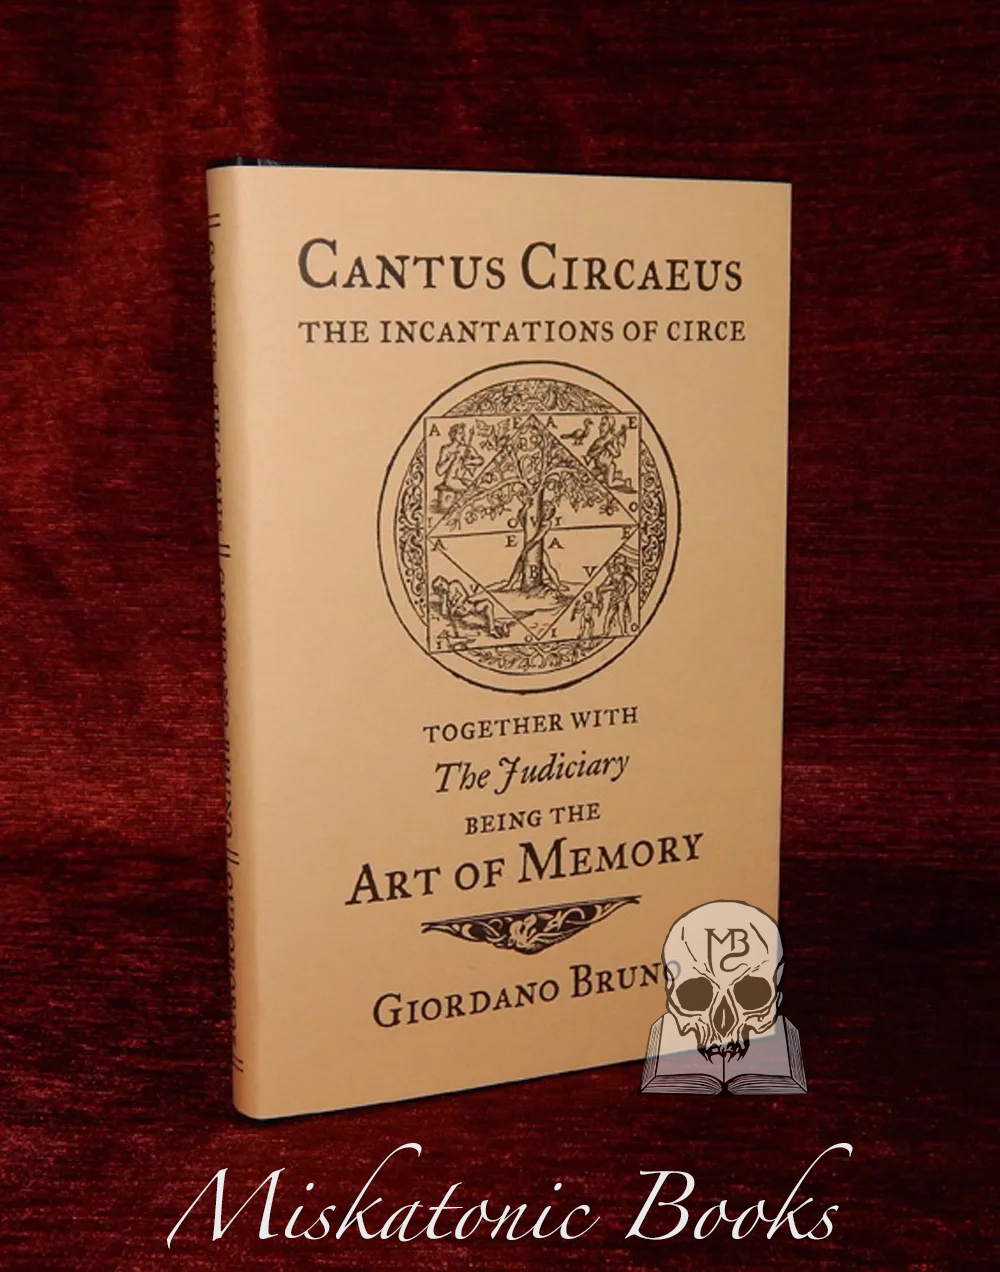 CANTUS CIRCAEUS: The Incantations of Circe, together with The Judiciary, being the Art of Memory by Giordano Bruno (First Edition Hardcover)